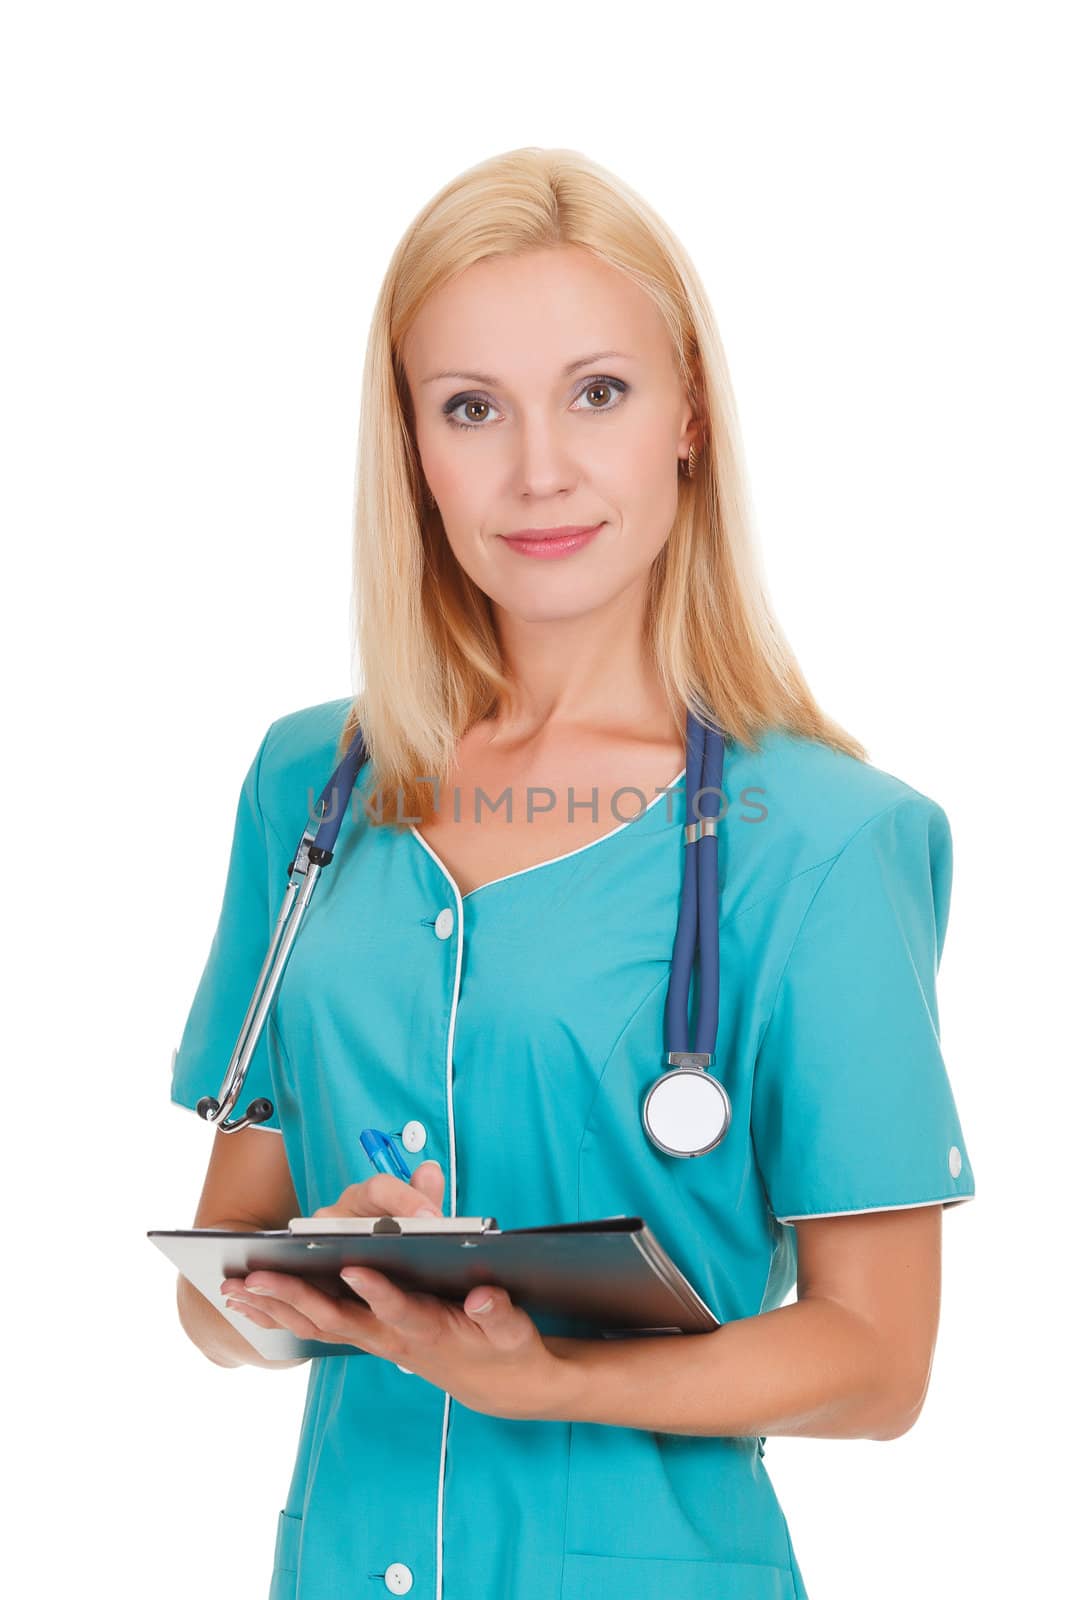 Smiling medical doctor woman with stethoscope and clipboard. Isolated over white background